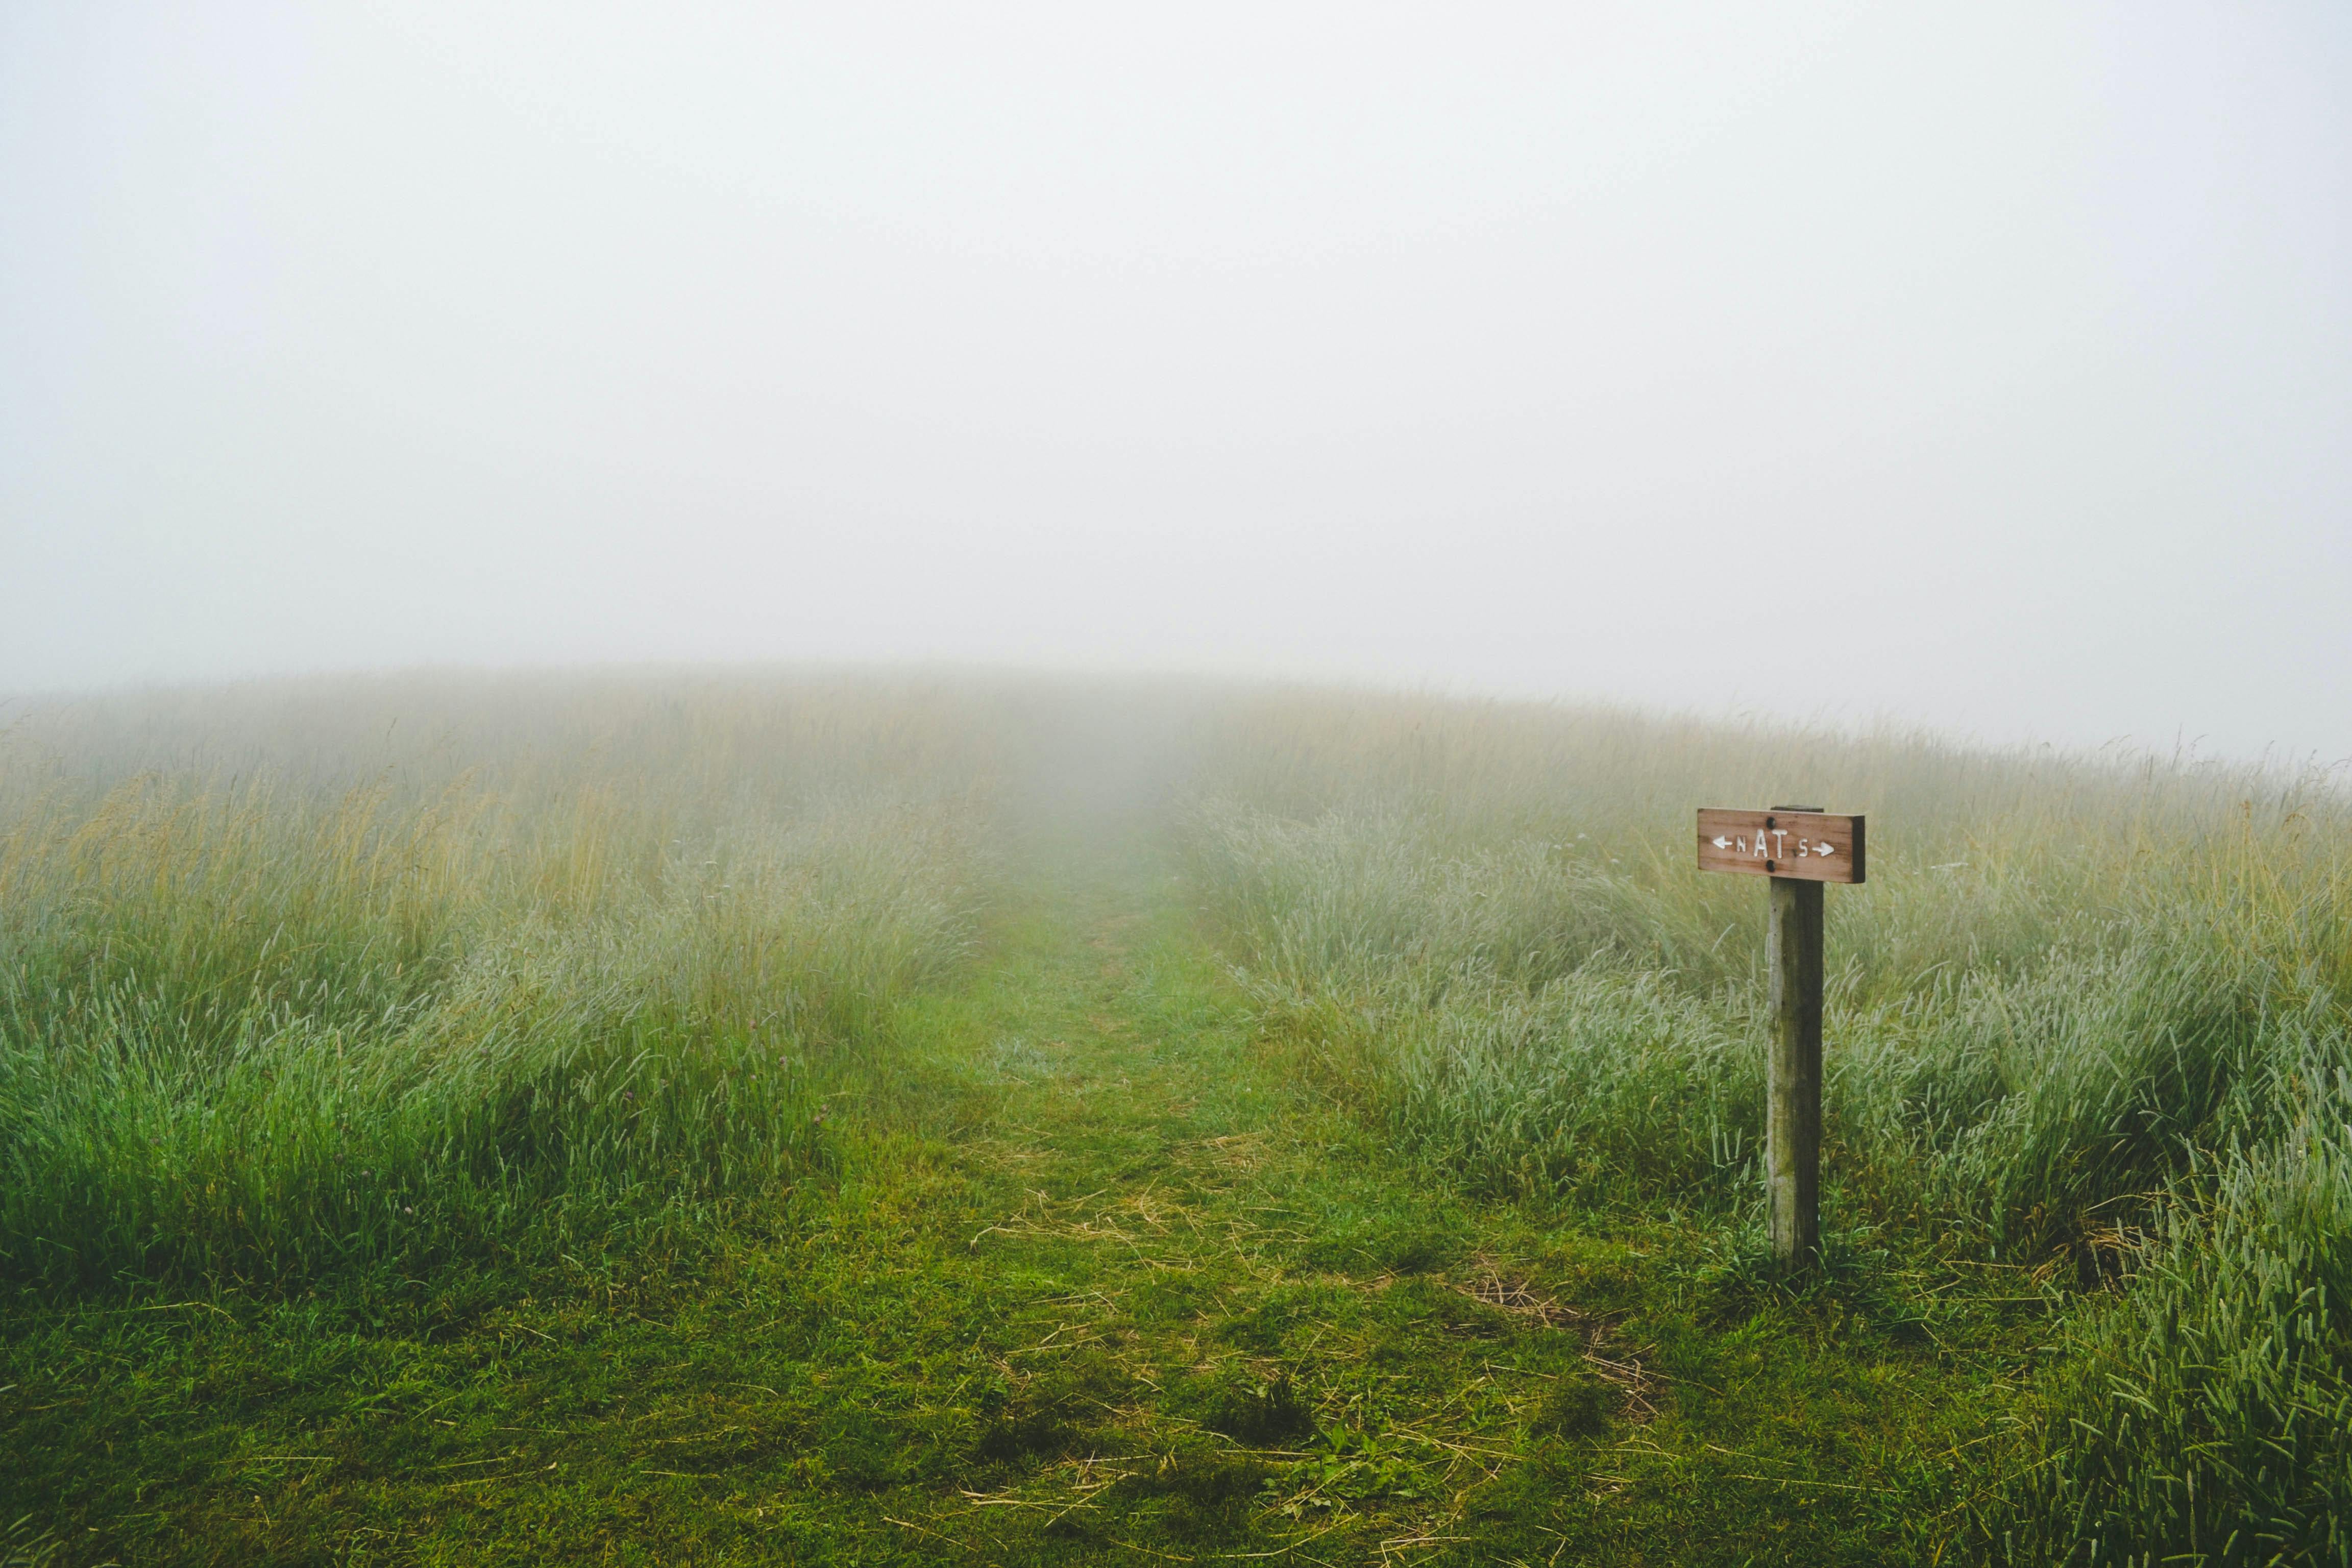 A grassy field in the fog with a wooden "AT" sign in the foreground